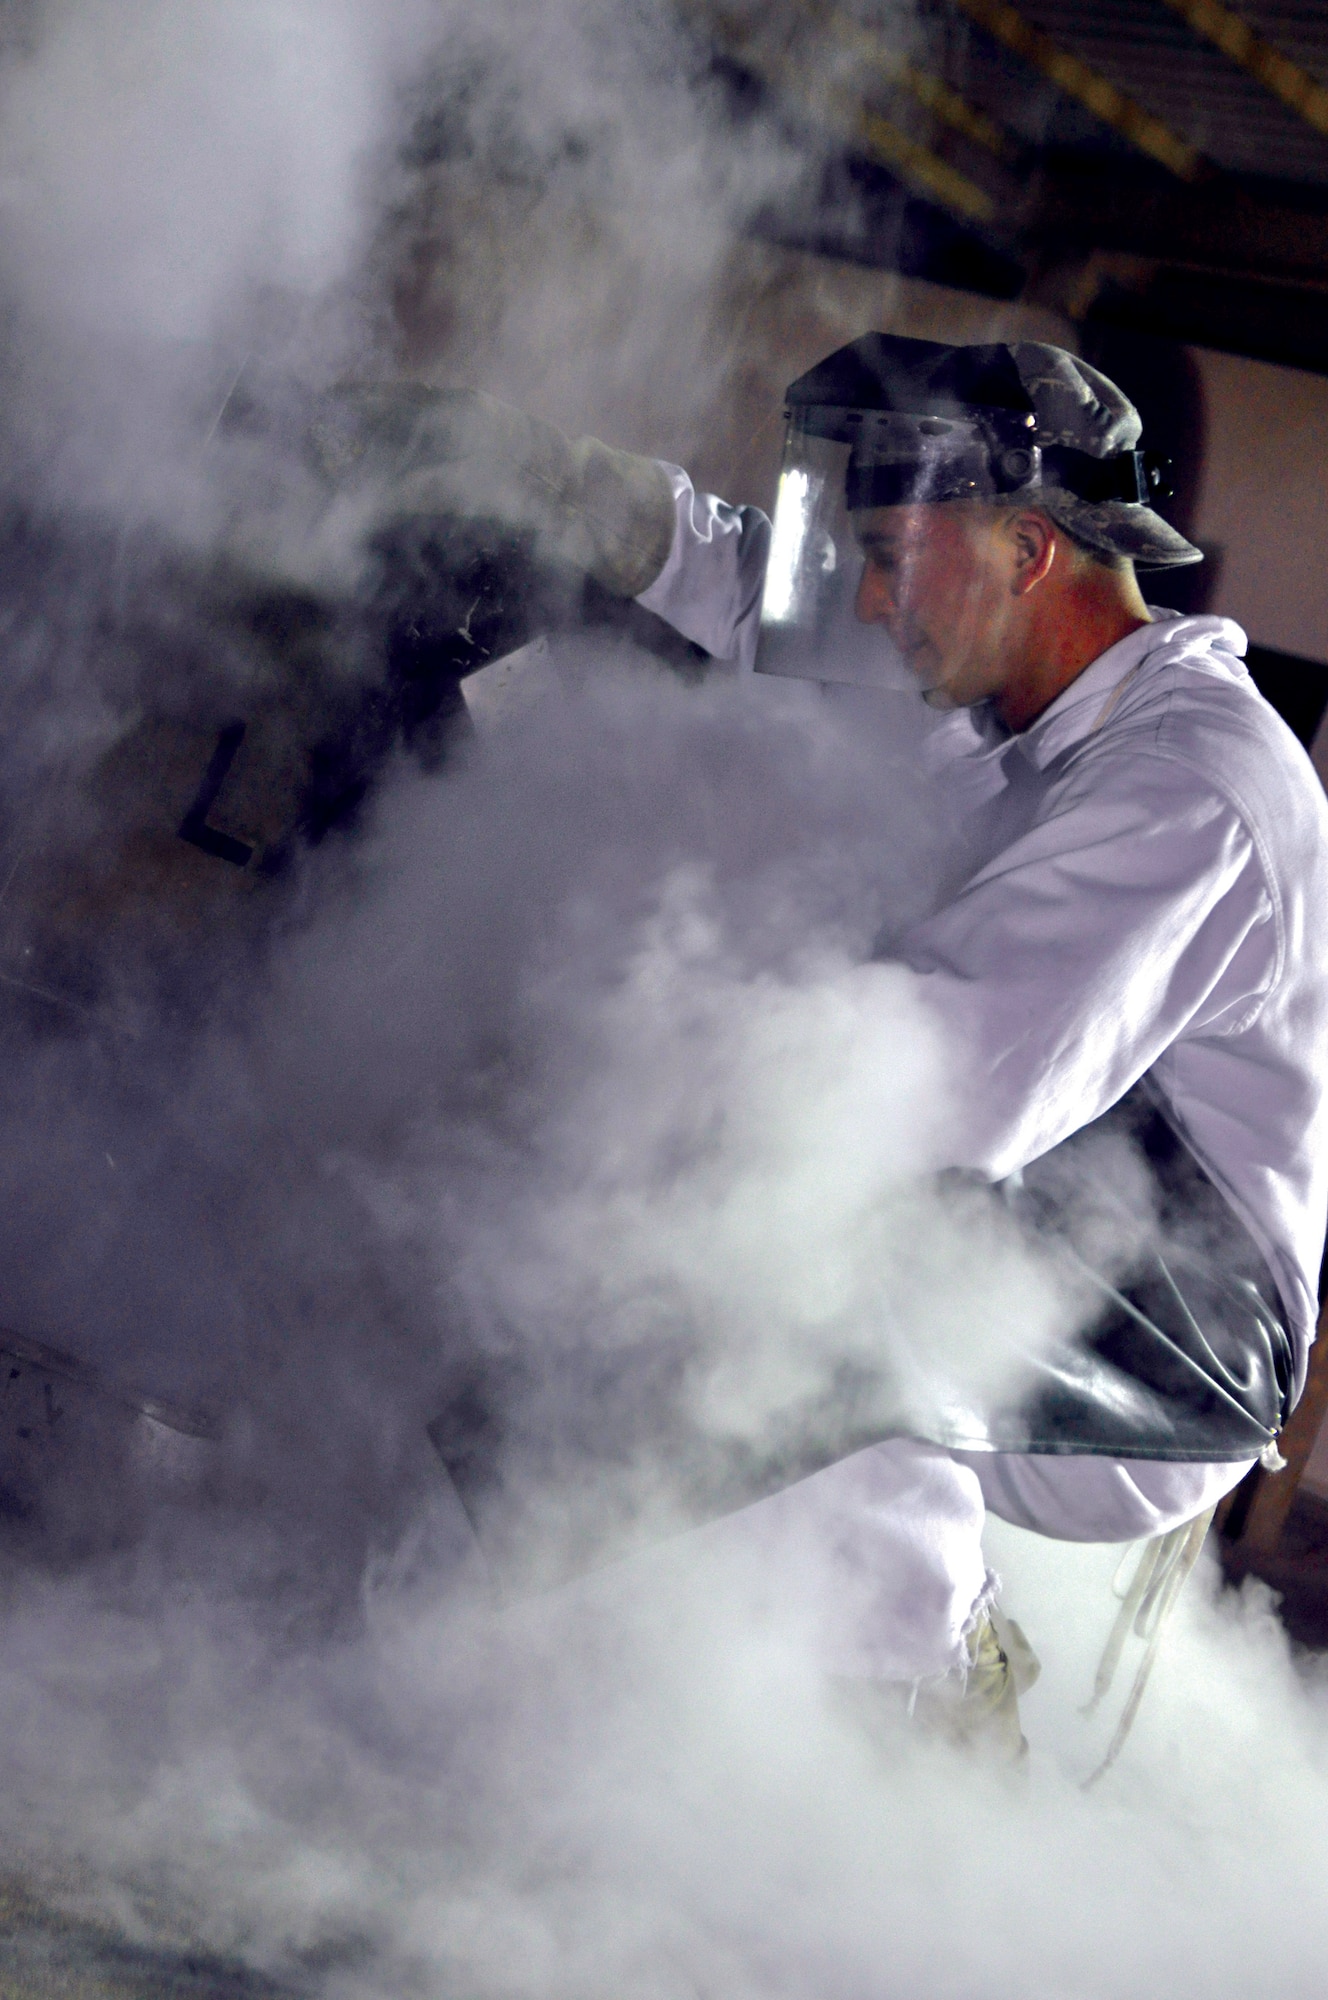 Staff Sgt. Michael Dietz, 379th Expeditionary Logistics Readiness Squadron cryogenics technician, pulls a sample of liquid oxygen from a cart. When the liquid oxygen boils off, Sergeant Dietz does an odor test to ensure the sample is pure. (U.S. Air Force photo/Staff Sgt. Nika Glover)